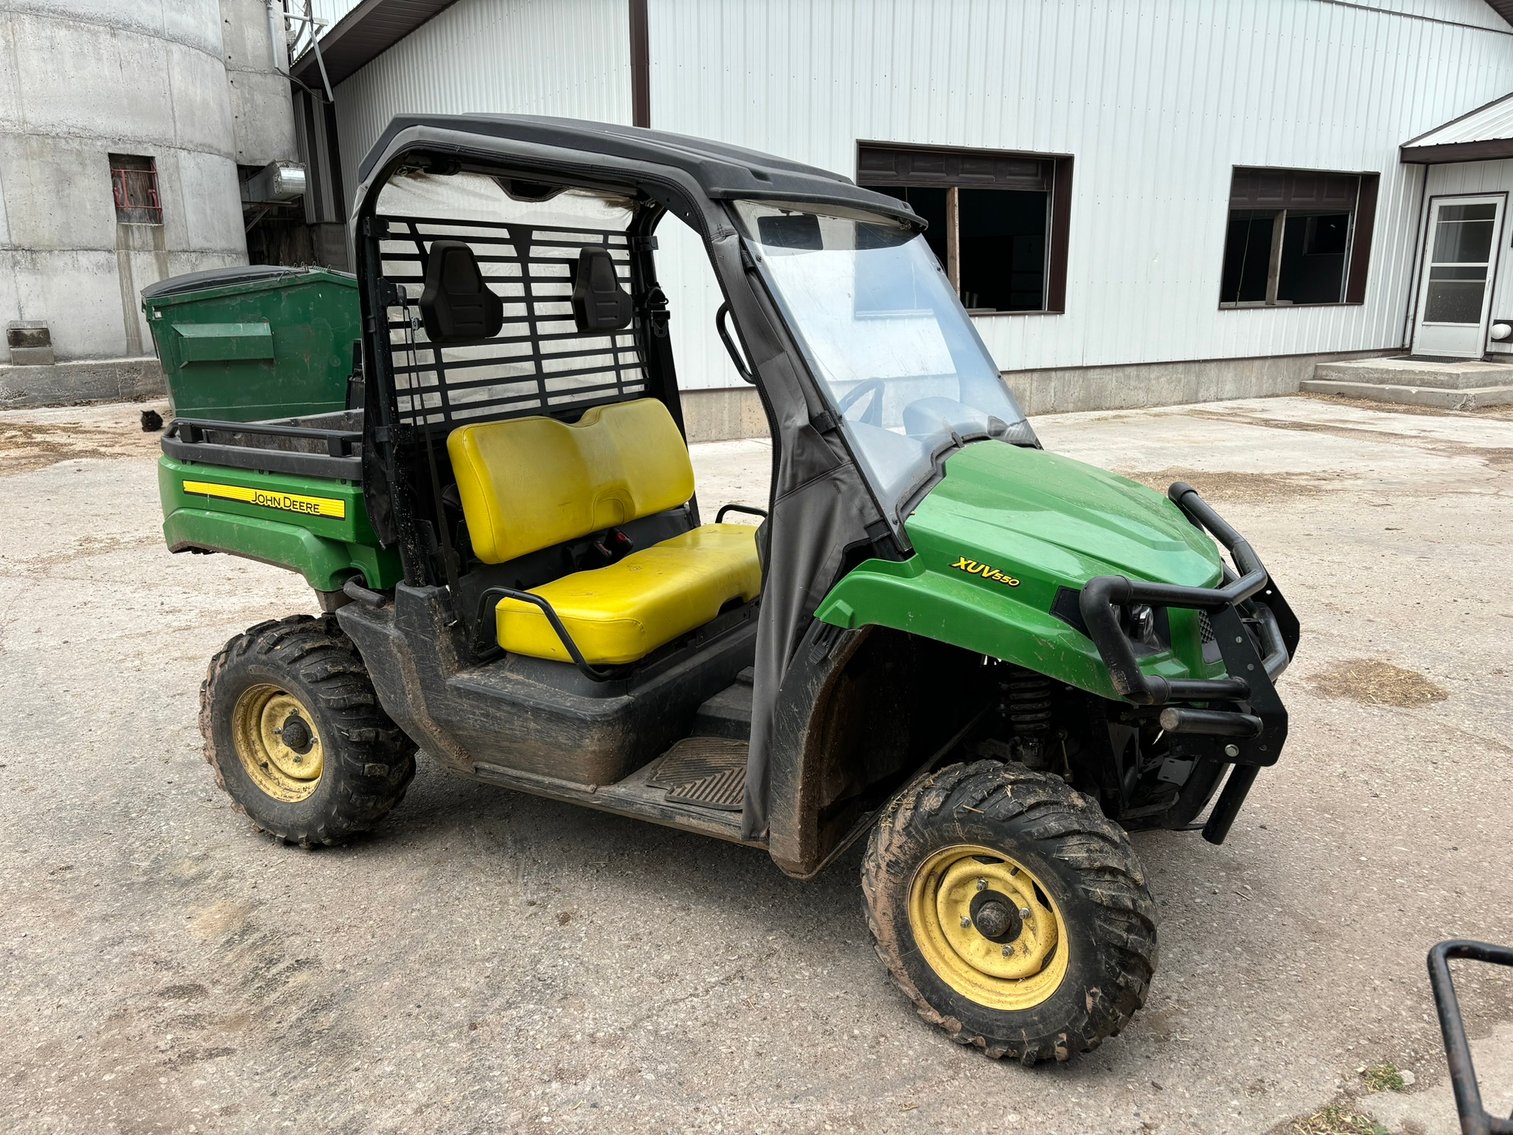 **WI & MN Multiple Locations Construction & AG Equipment Auction